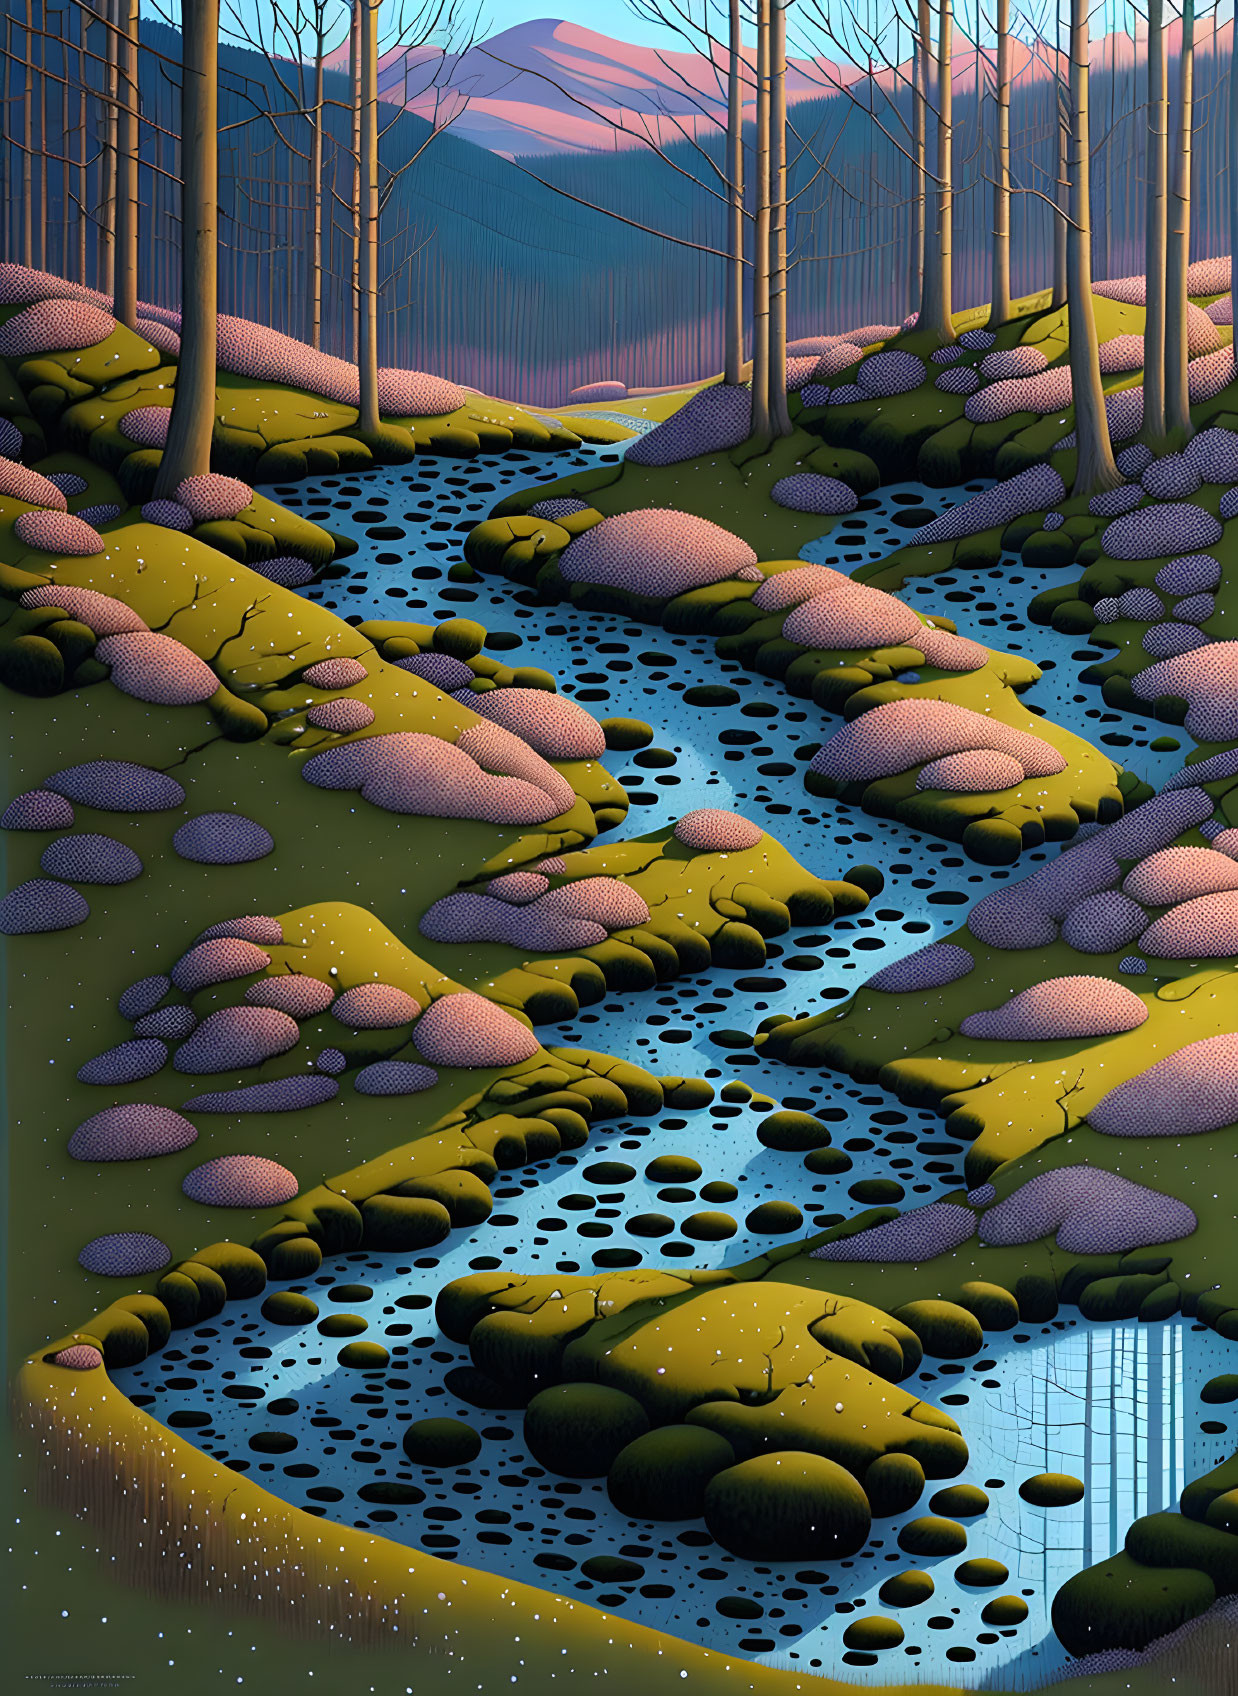 Stylized forest scene with stream, elongated trees, rounded stones, and mountain backdrop